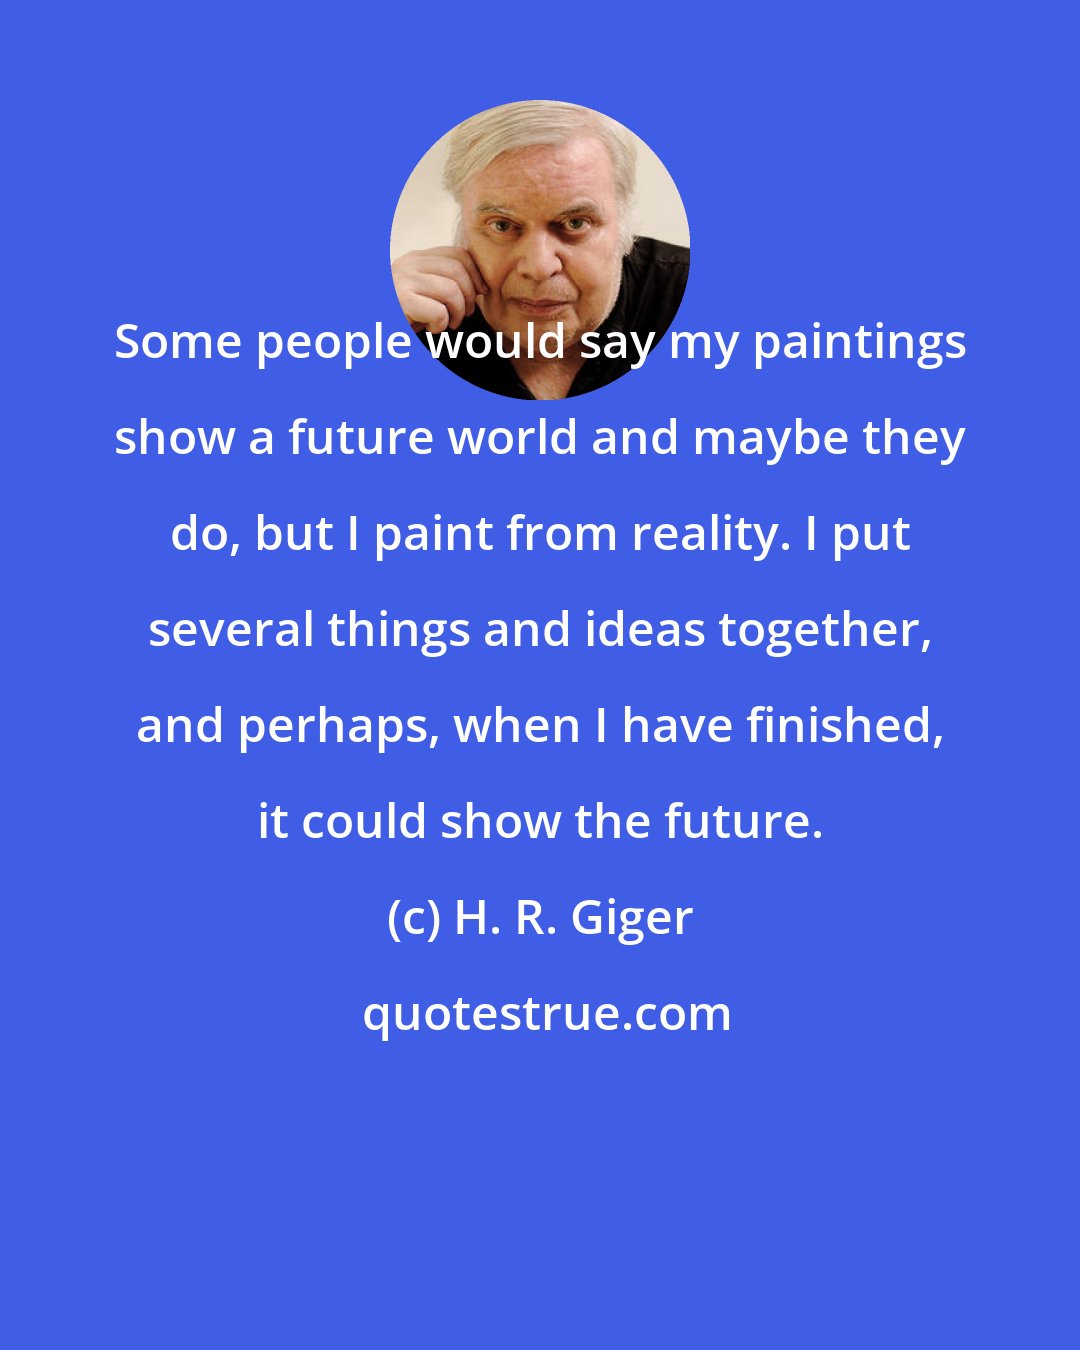 H. R. Giger: Some people would say my paintings show a future world and maybe they do, but I paint from reality. I put several things and ideas together, and perhaps, when I have finished, it could show the future.